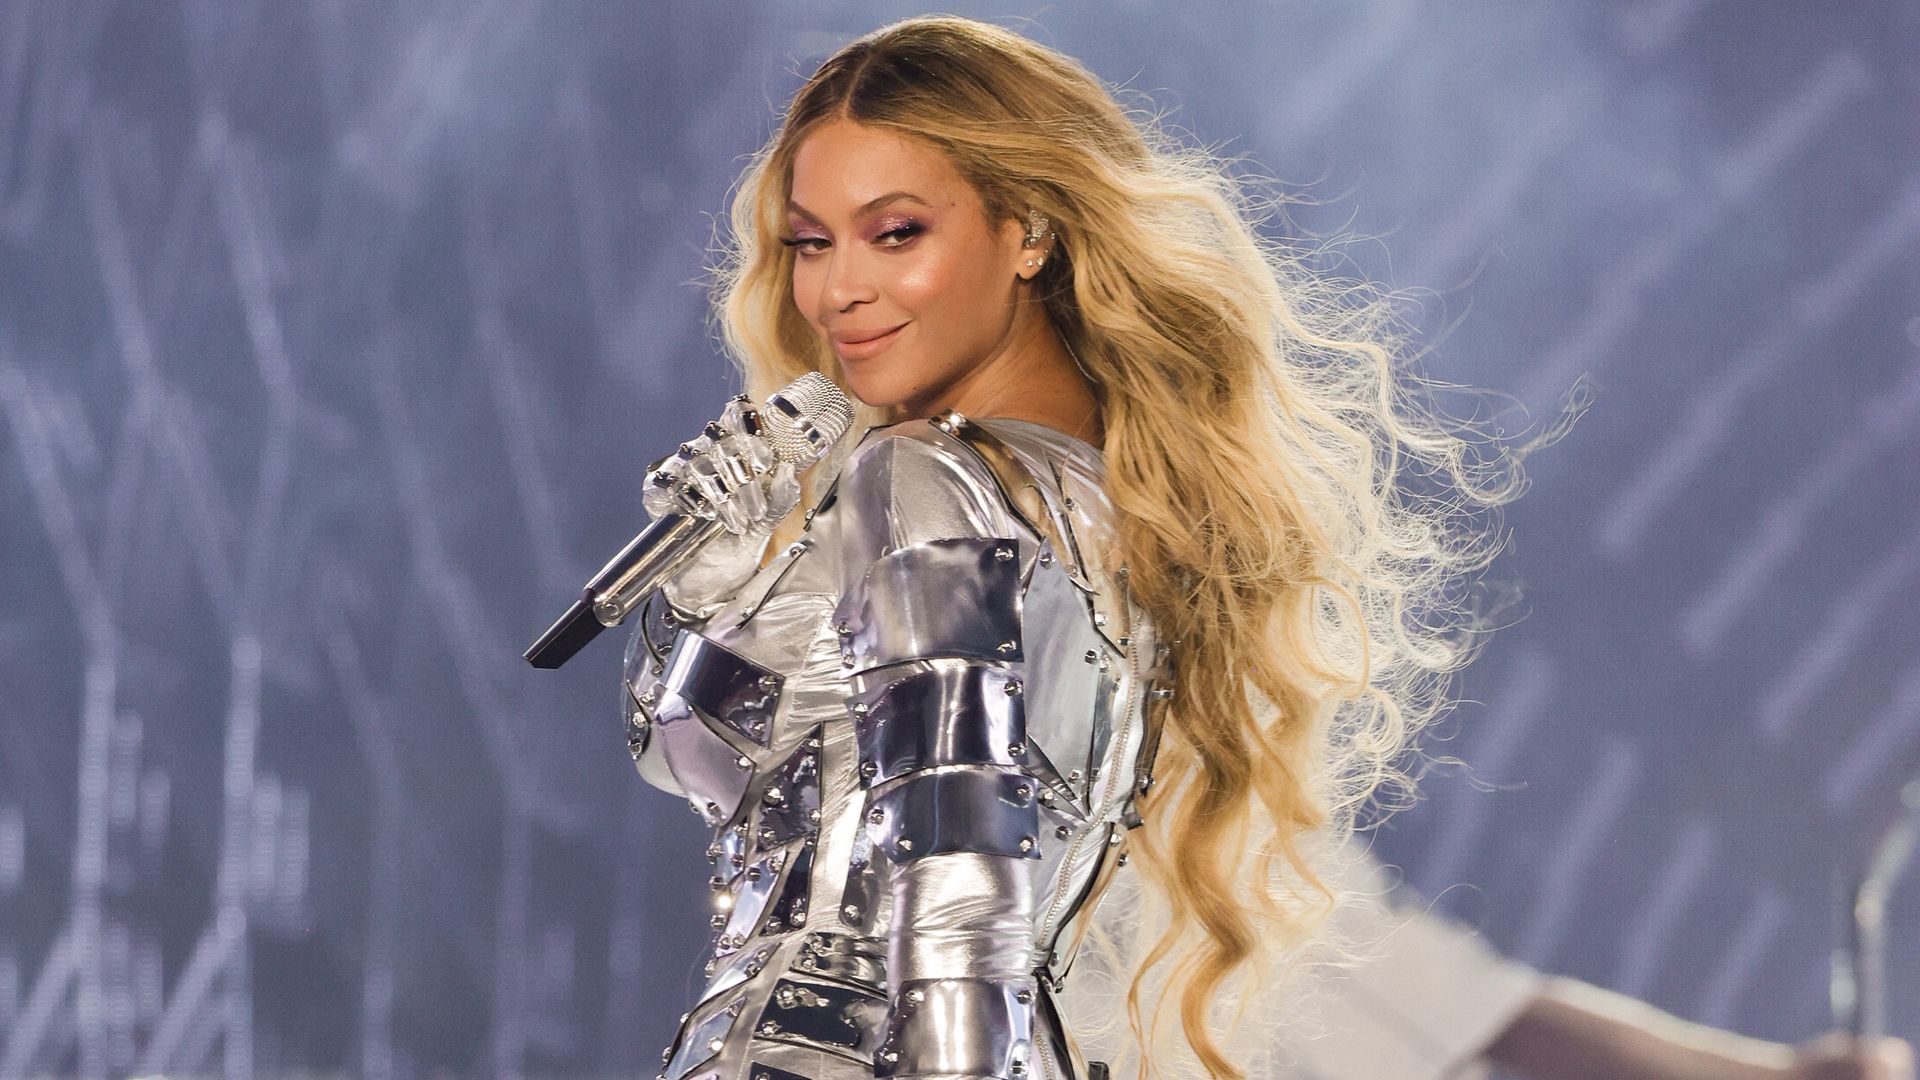 Beyoncé shares tender moment with daughter Blue Ivy that leaves fans